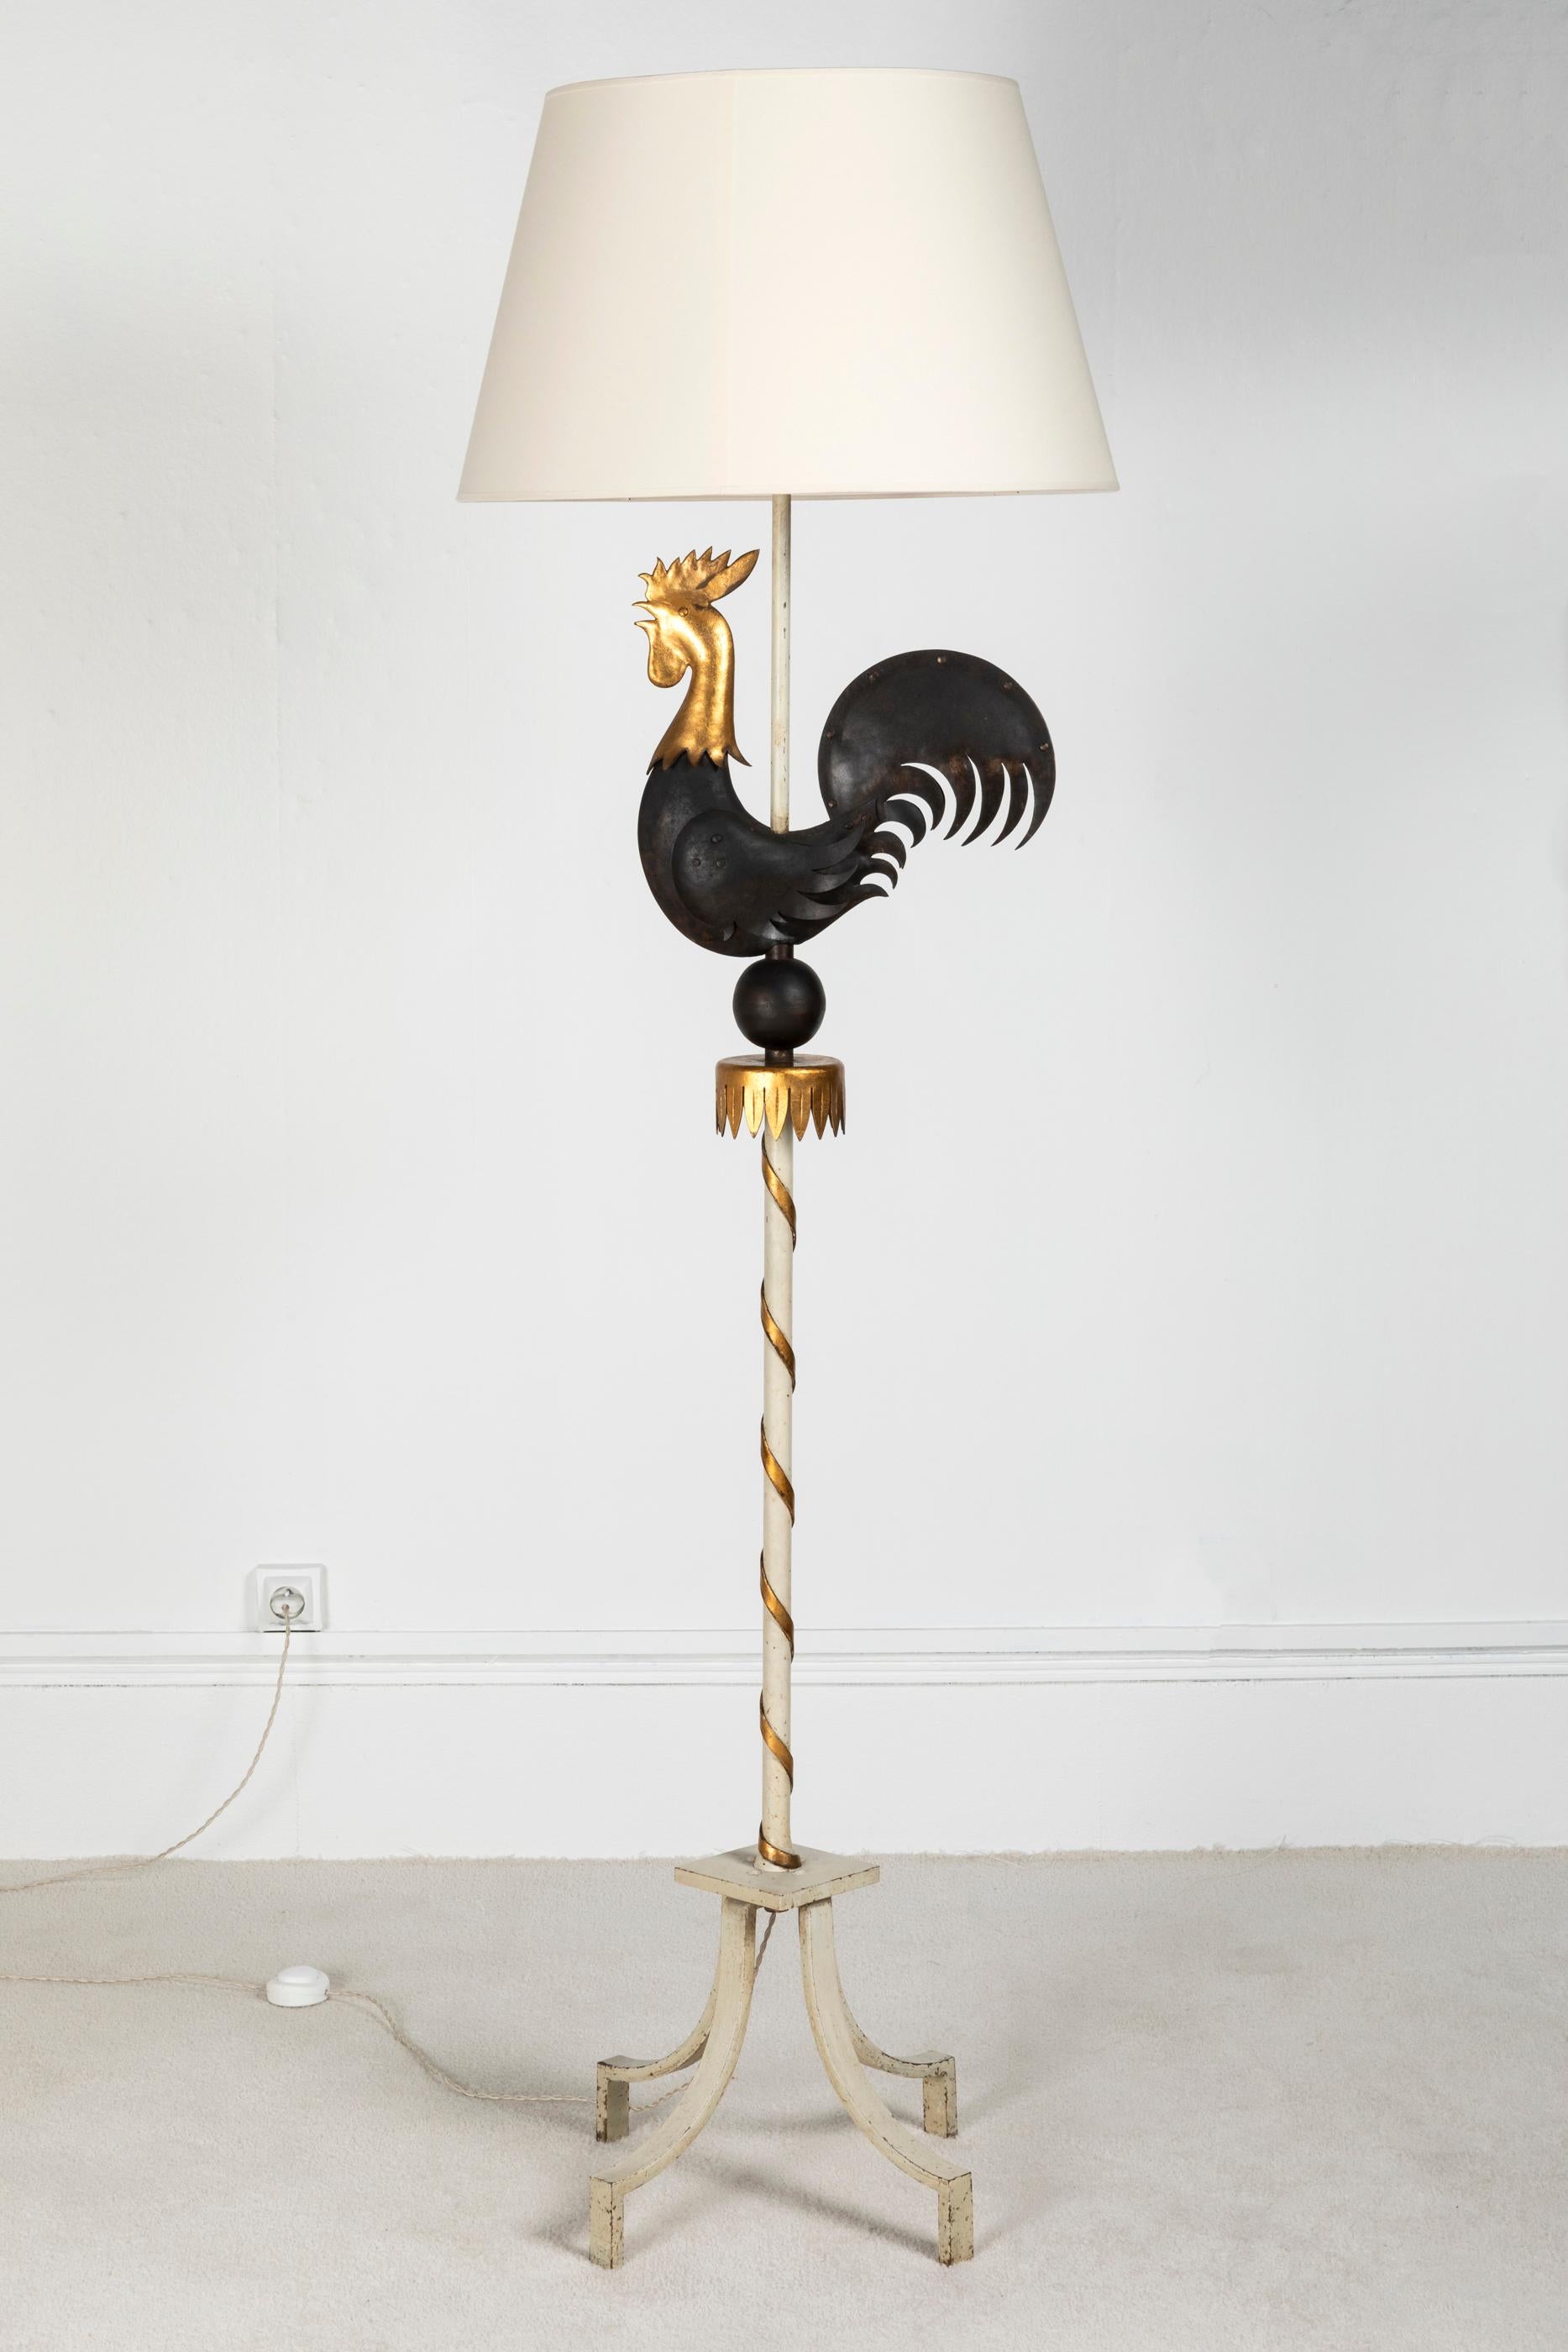 A rooster patinated in black and gilt wrought iron .The foot lamp is lacquered in white with a golden spiral around it. This lamp is in the style and reminiscent of the famous French ironworker Gilbert Poillerat.